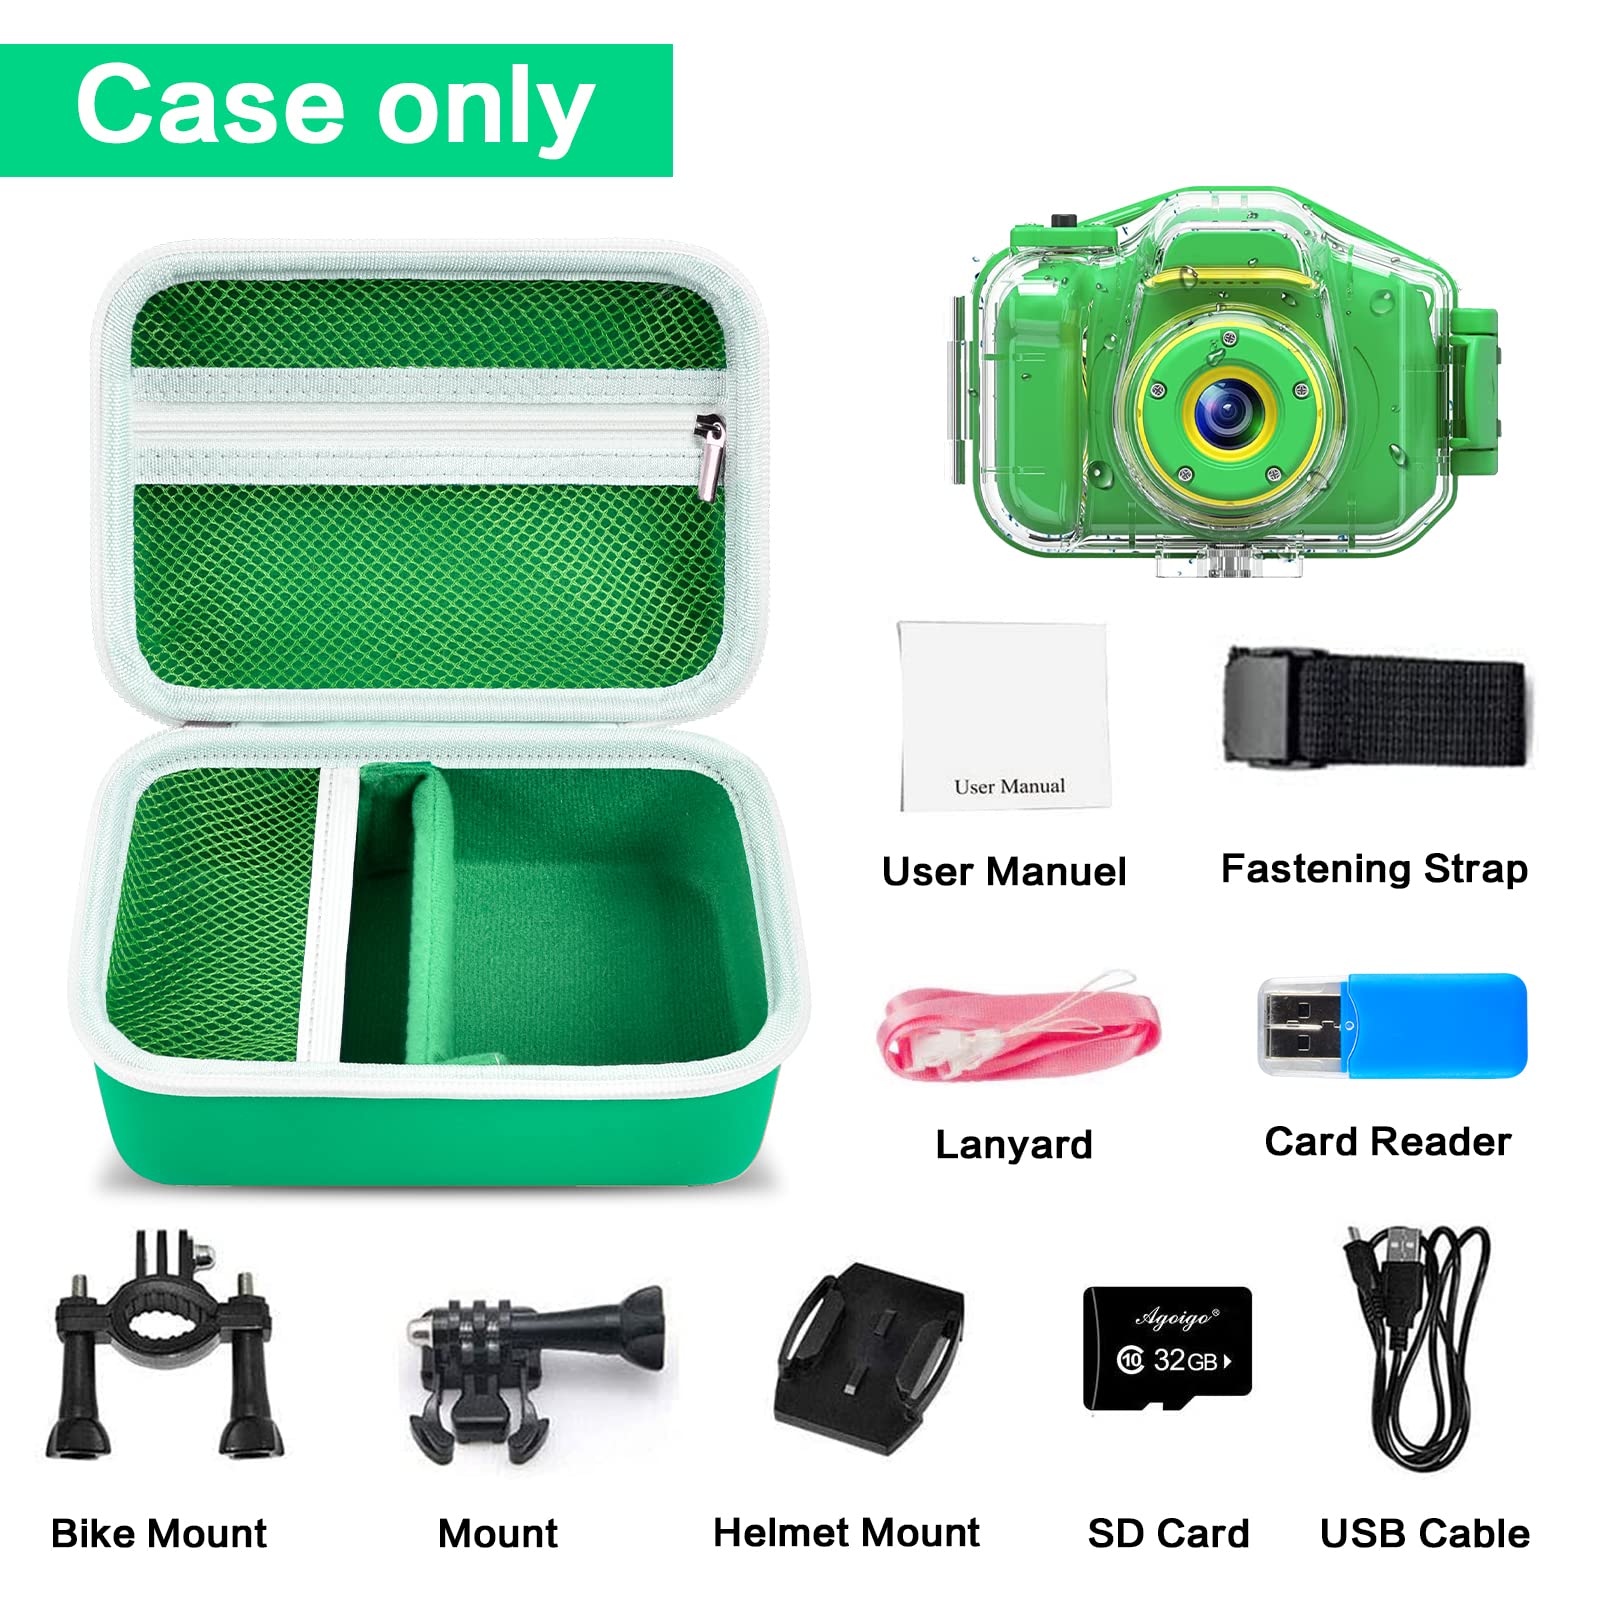 Againmore Kids Camera Case Compatible with Seckton/for Goopow/for Dylanto/for ESOXOFFORE/for Agoigo/for GKTZ/for Anchioo Digital Waterproof Camera. Portable Instant Print Cameras Storage-Green